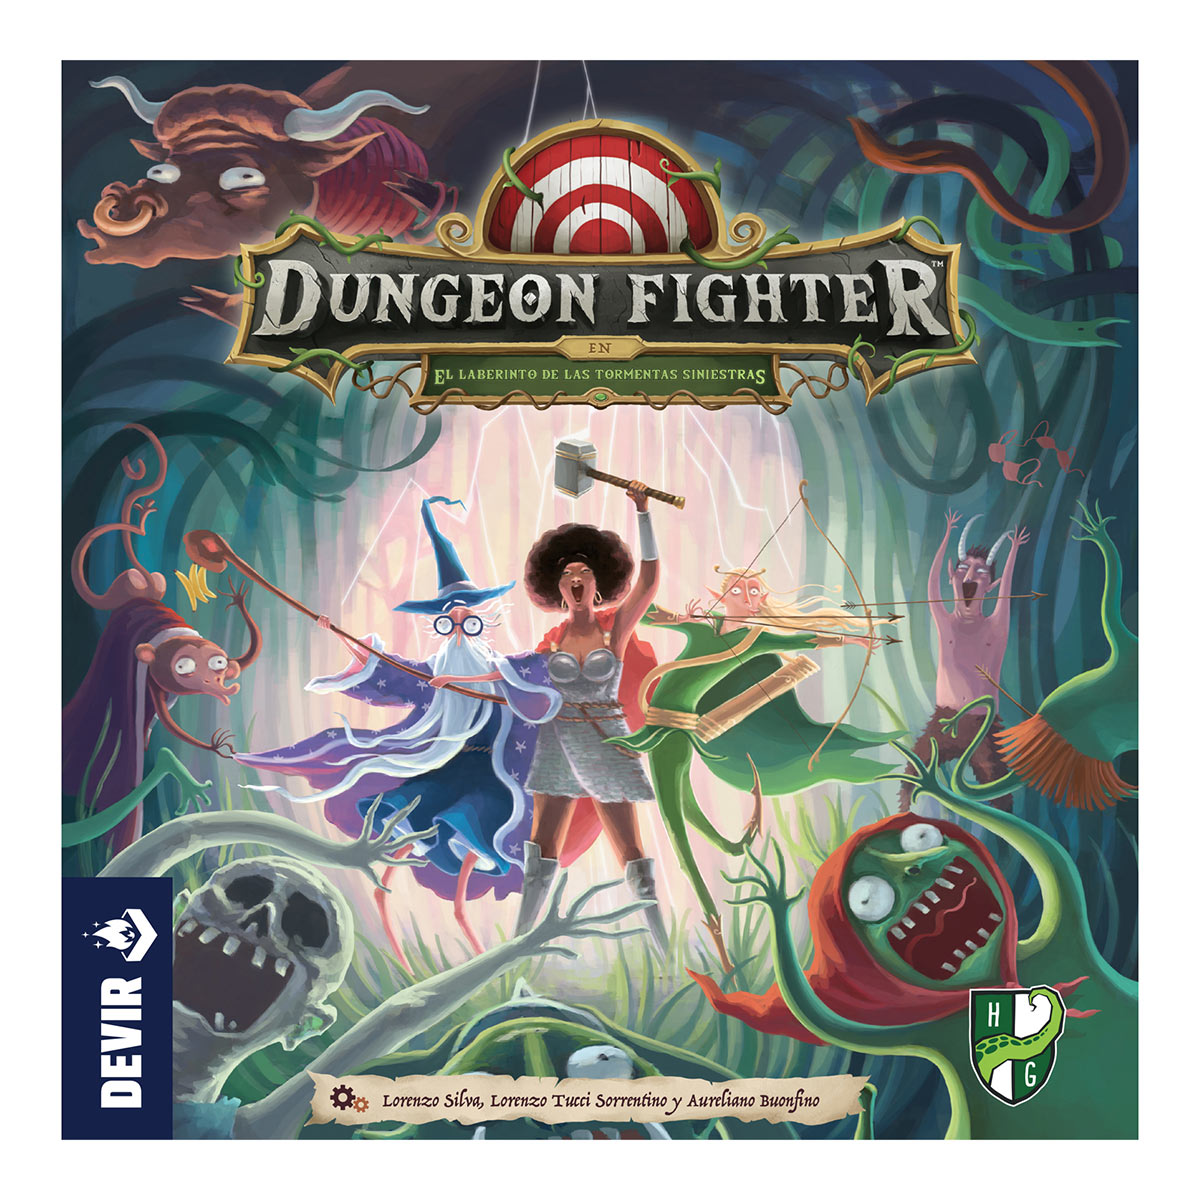 Dungeon Fighter expa front